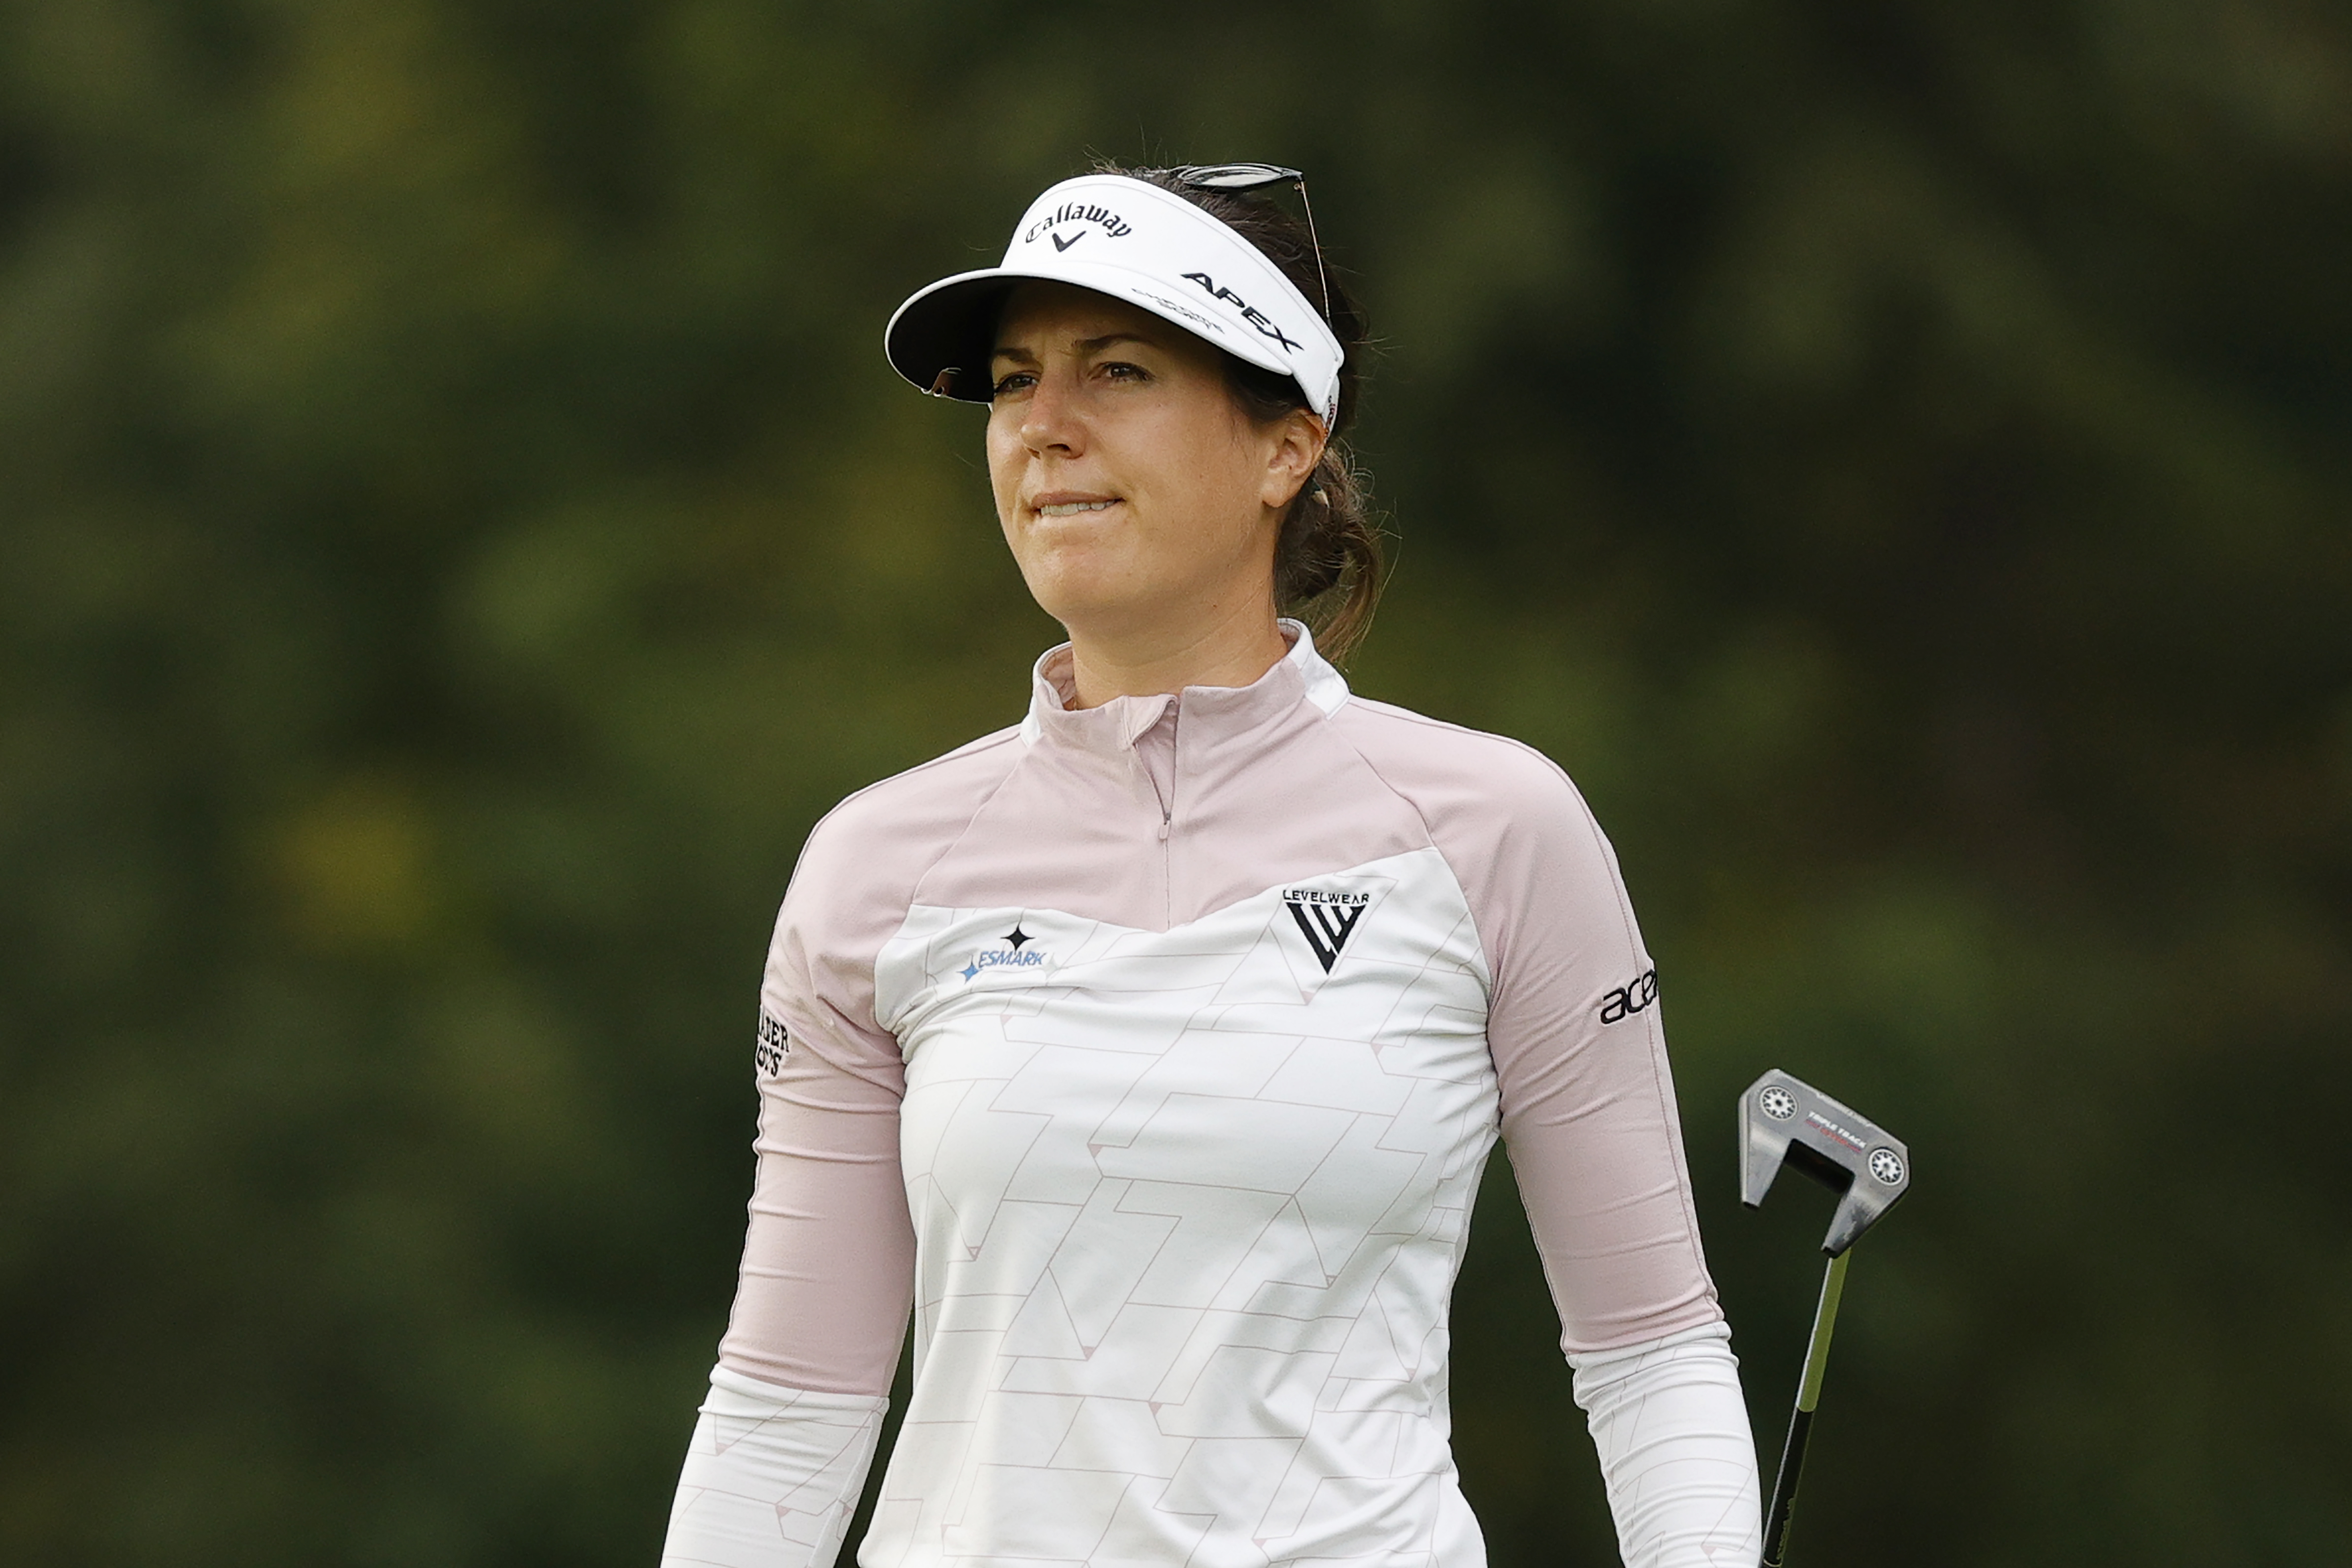 LPGA Tour winner These four things increase stress on the course